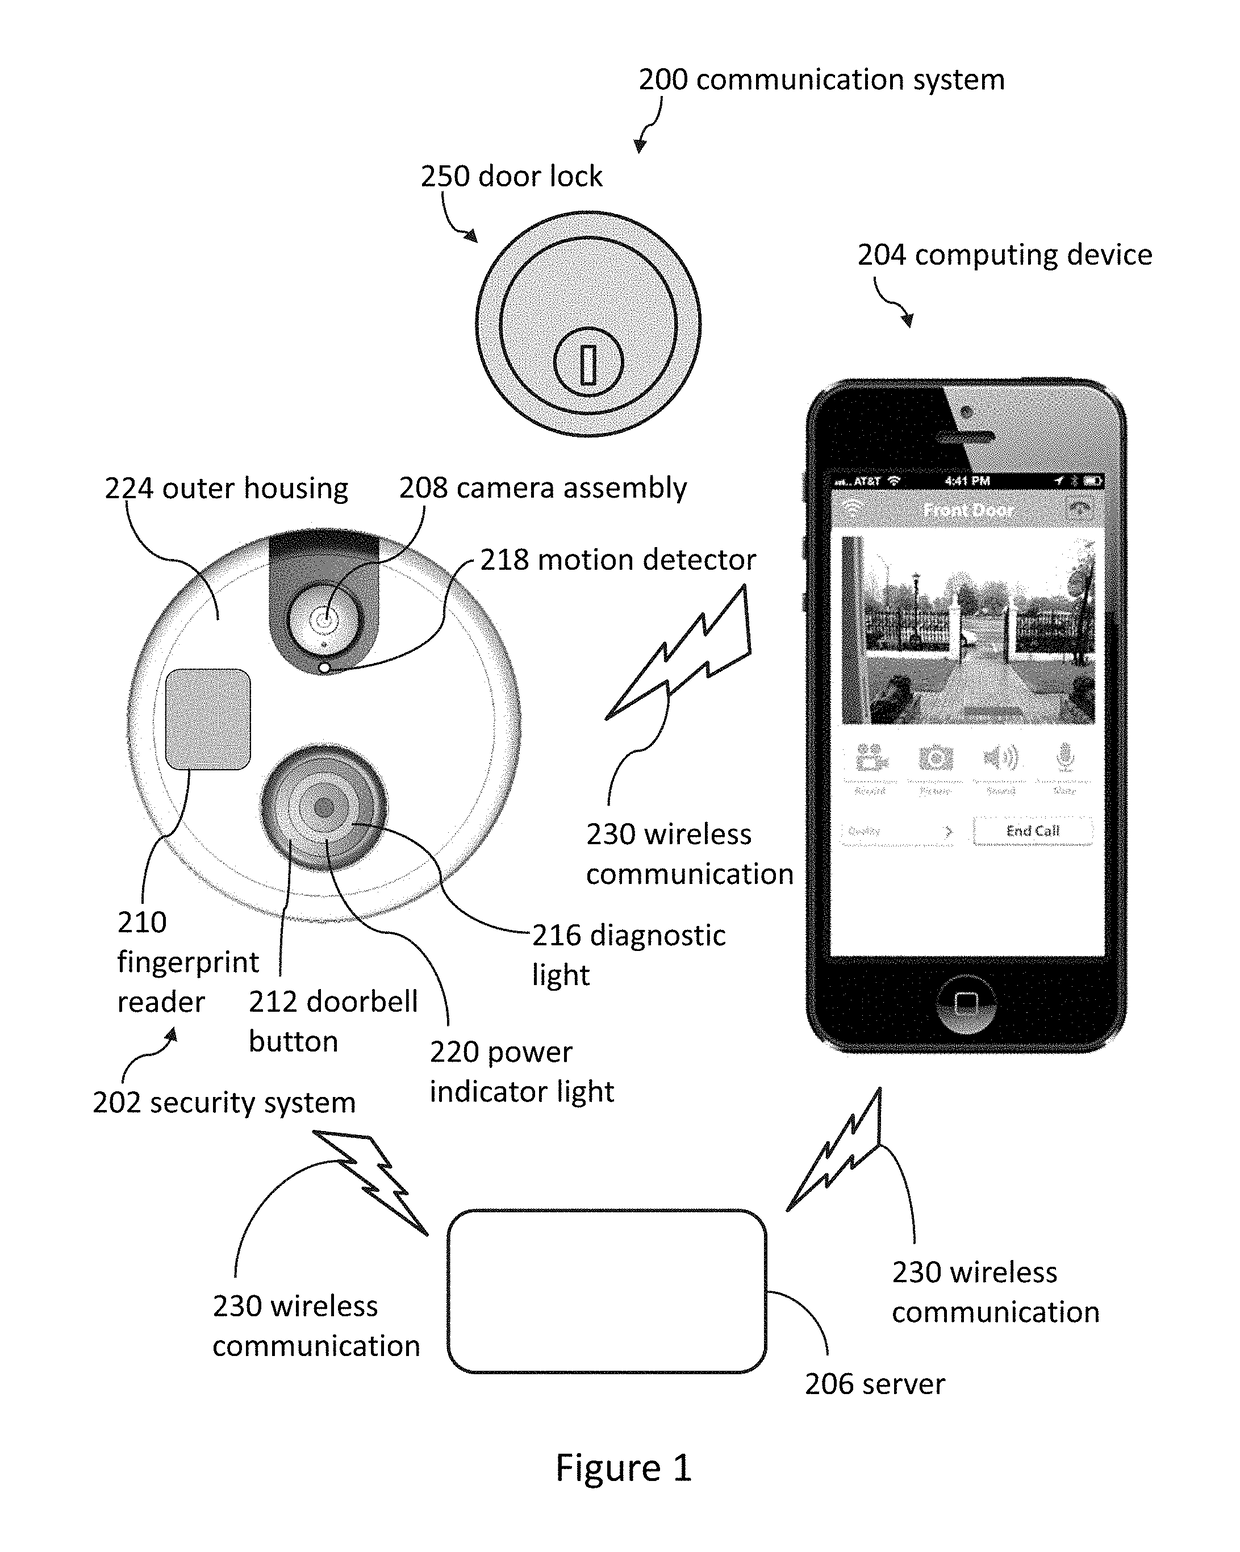 Doorbell communication and electrical systems